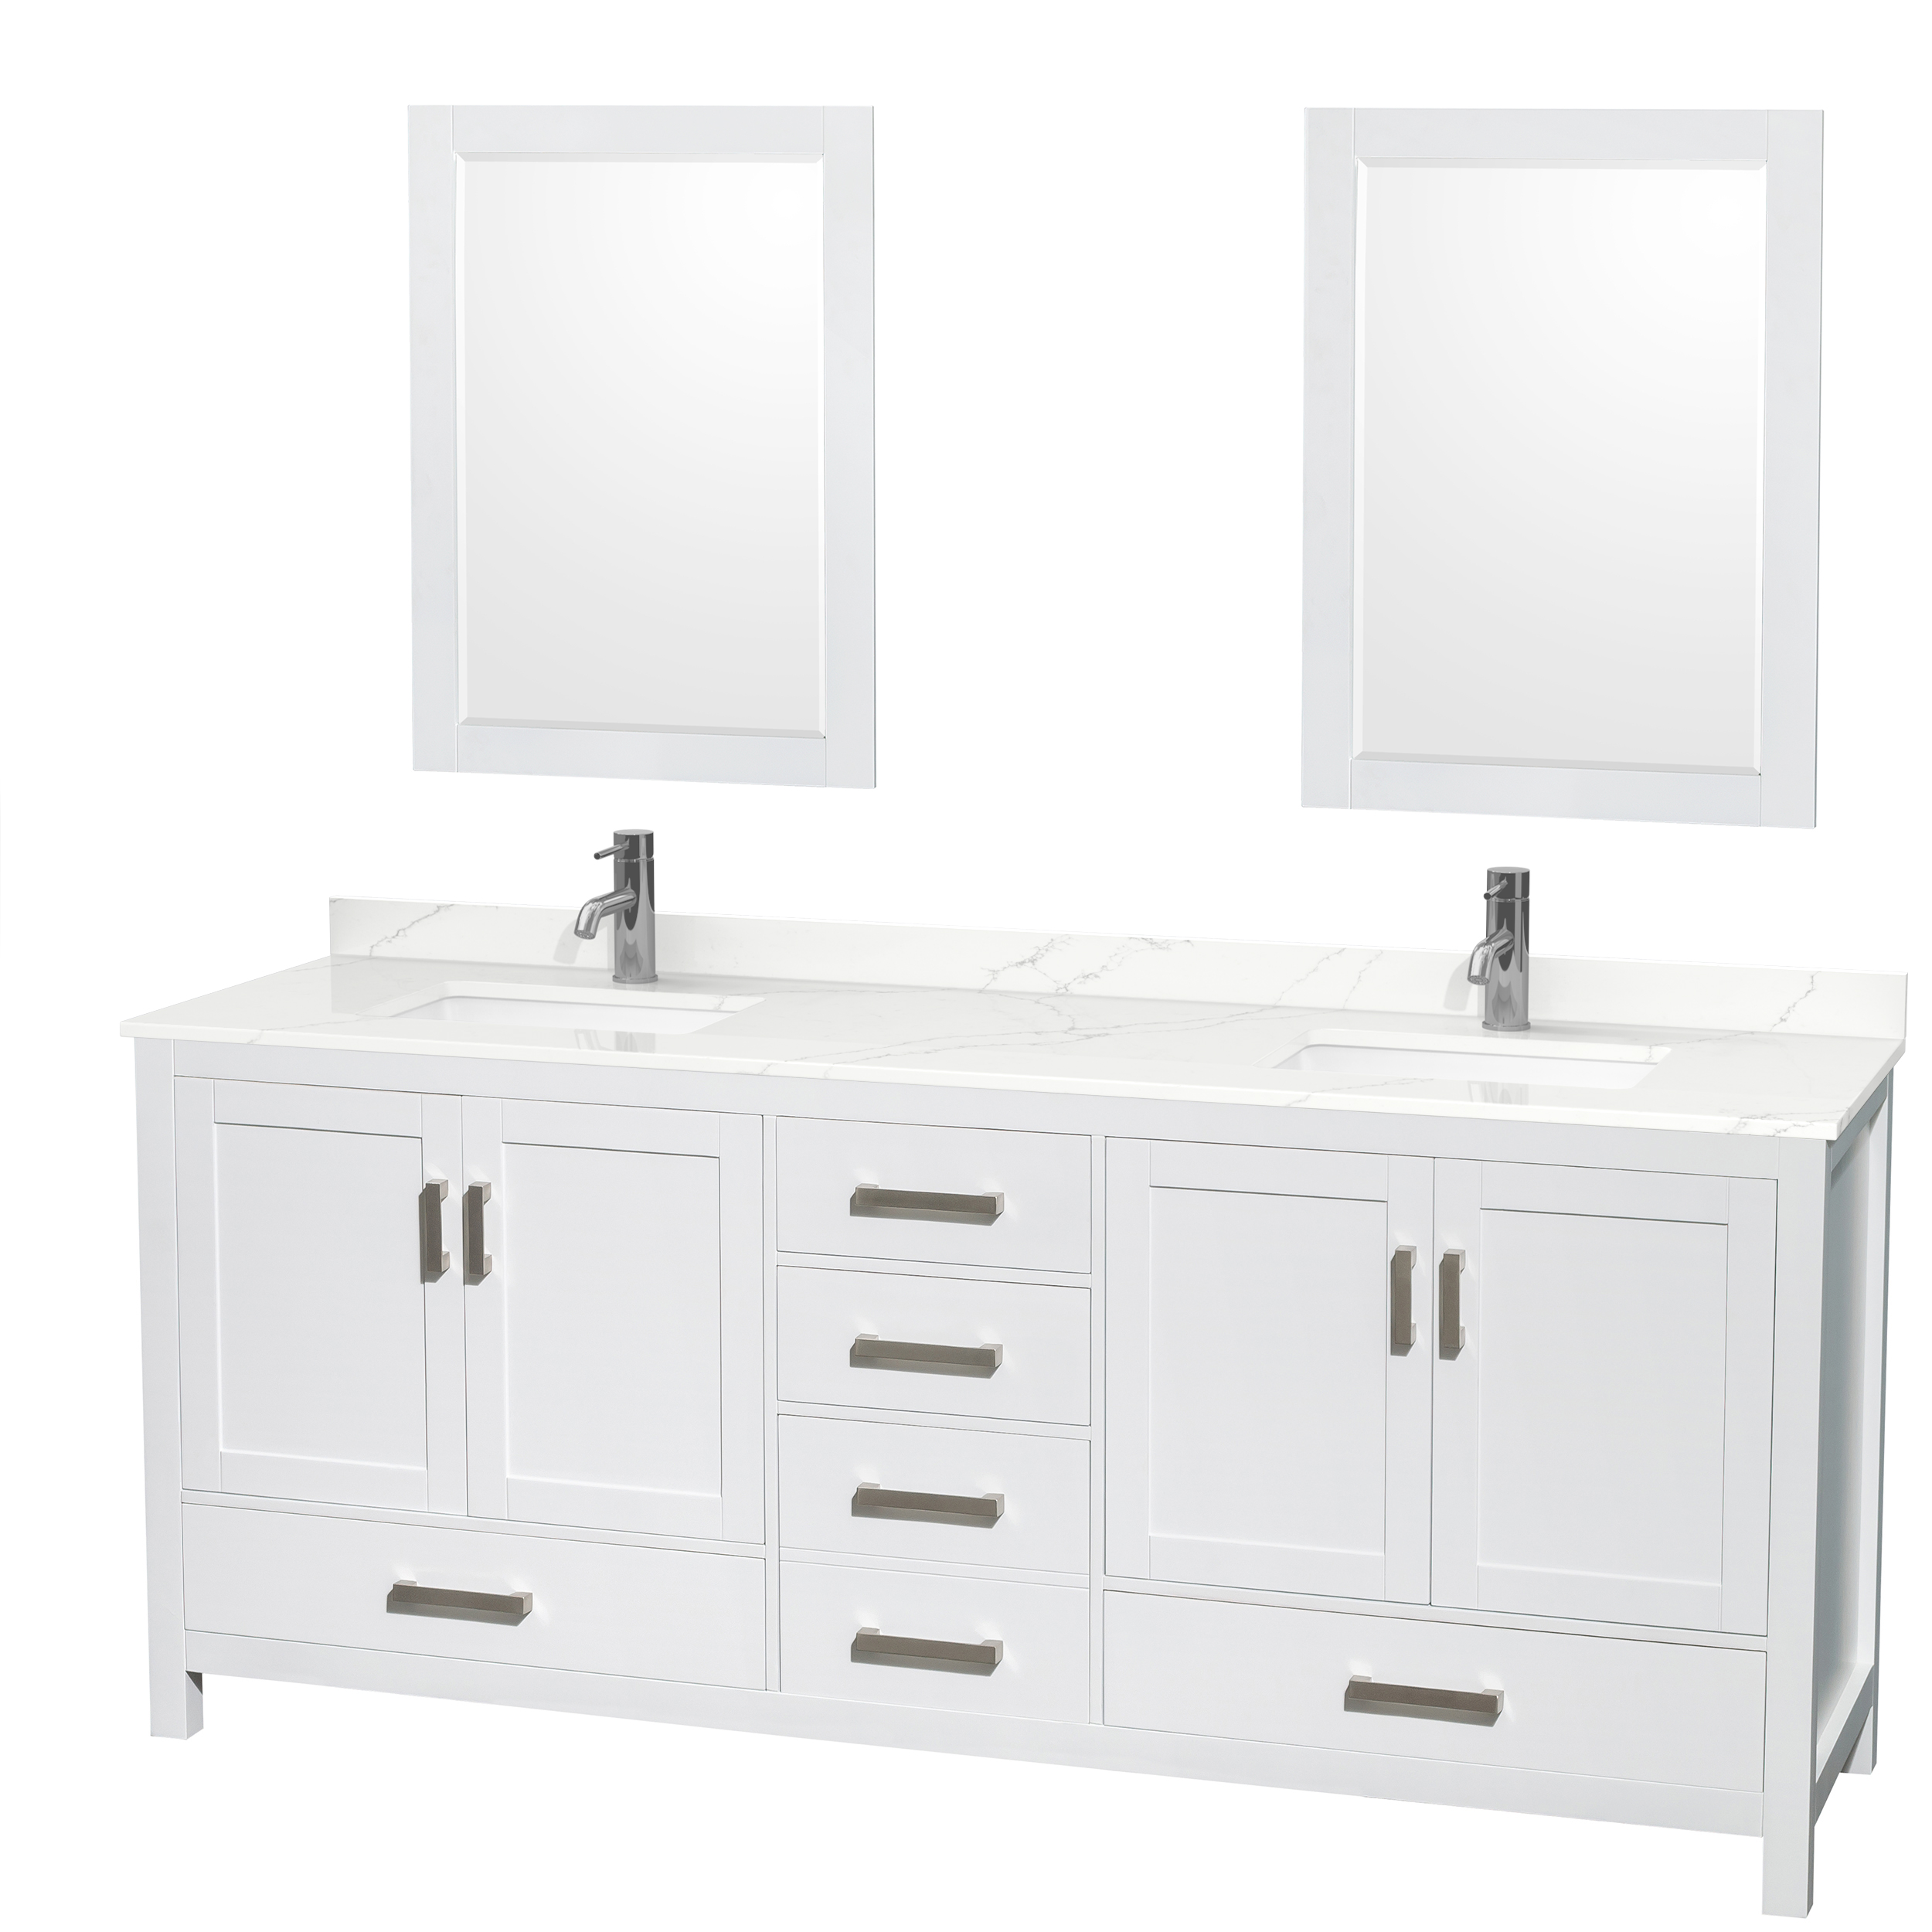 sheffield 80" double bathroom vanity by wyndham collection - white